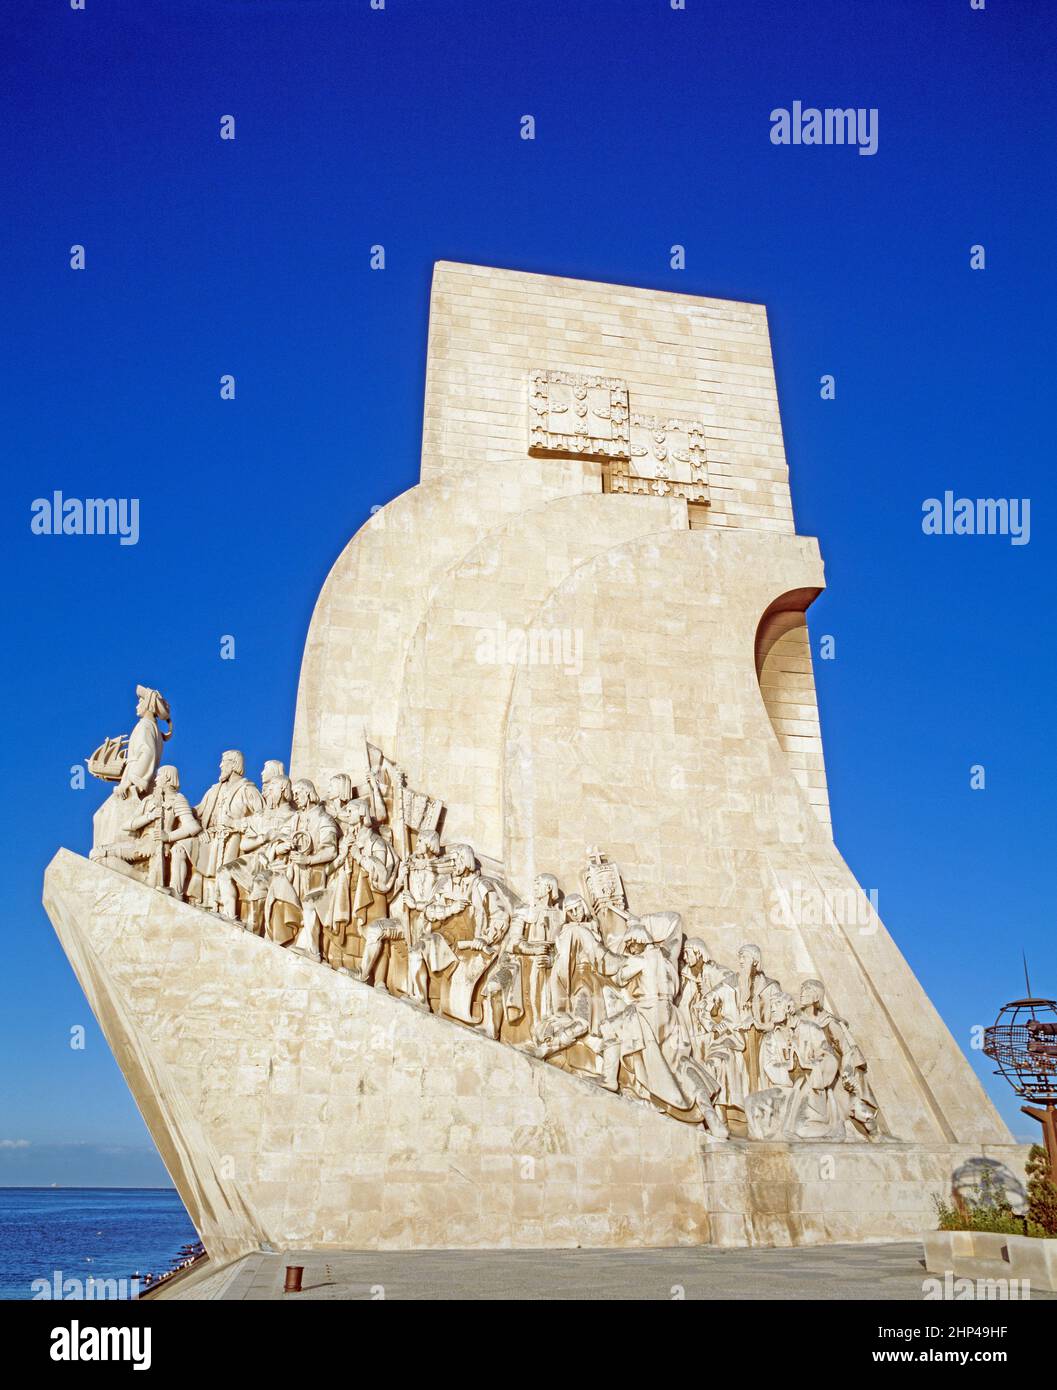 Portugal. Lisbon. Belem. Monument to the Discoveries. Stock Photo